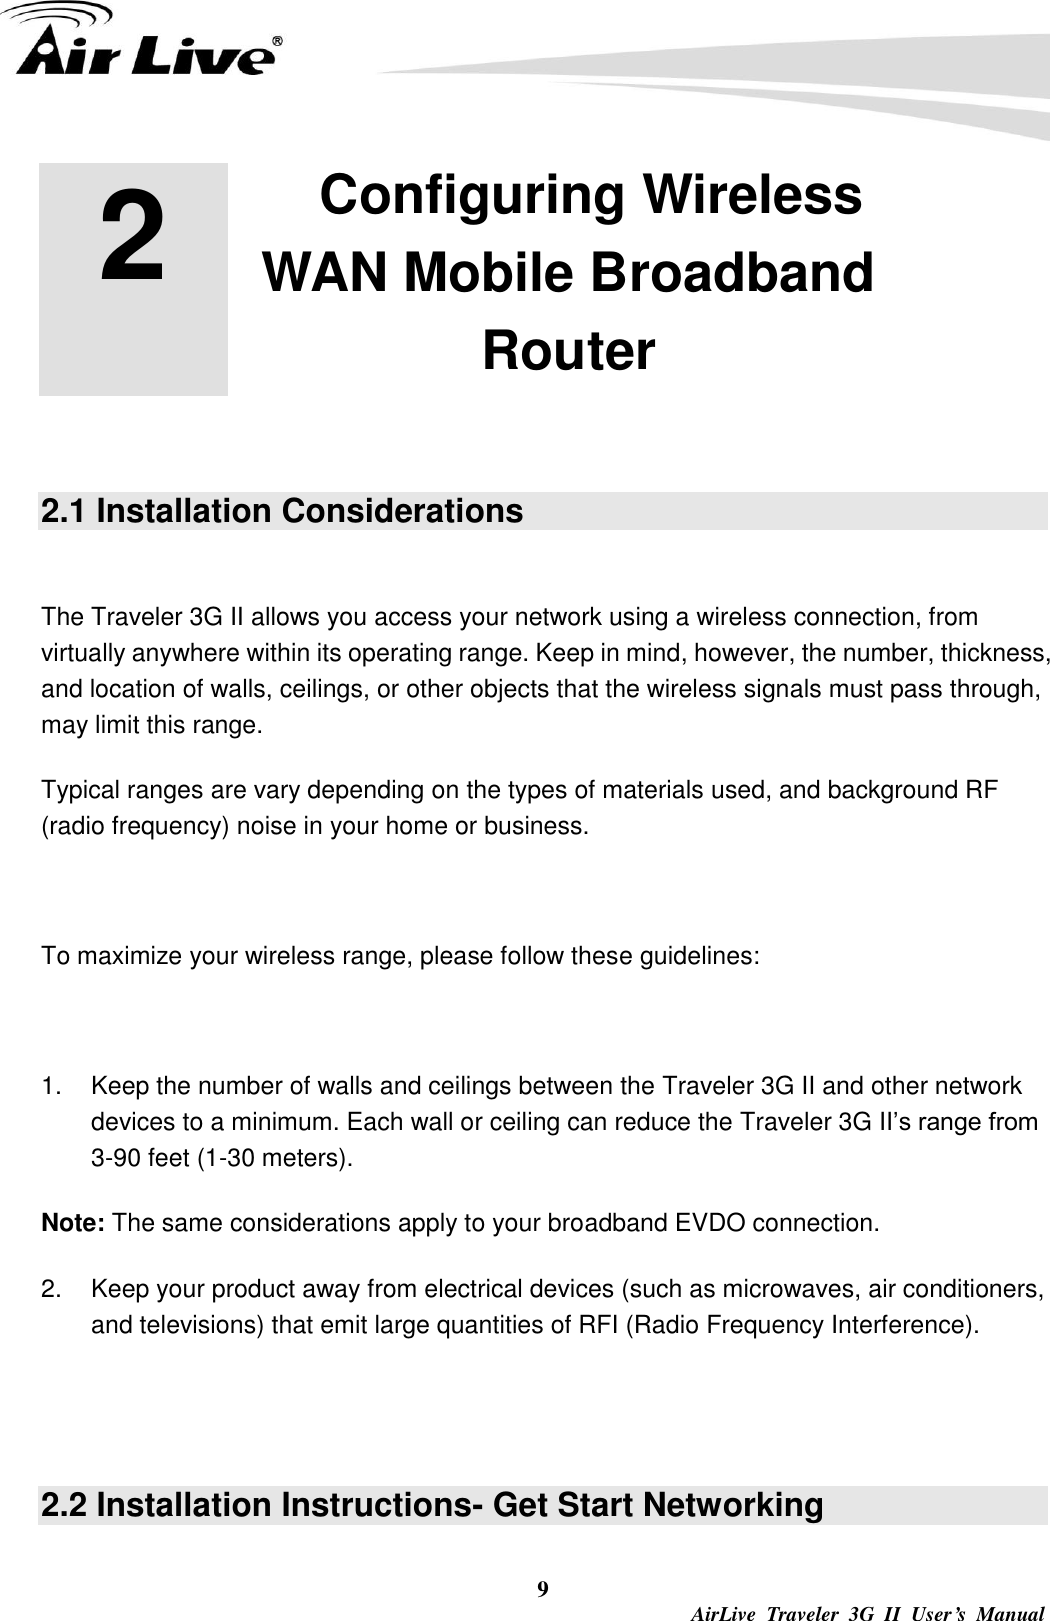  9  AirLive  Traveler  3G  II  User’s  Manual 2 2. Configuring Wireless WAN Mobile Broadband Router  2.1 Installation Considerations  The Traveler 3G II allows you access your network using a wireless connection, from virtually anywhere within its operating range. Keep in mind, however, the number, thickness, and location of walls, ceilings, or other objects that the wireless signals must pass through, may limit this range. Typical ranges are vary depending on the types of materials used, and background RF (radio frequency) noise in your home or business.  To maximize your wireless range, please follow these guidelines:  1.  Keep the number of walls and ceilings between the Traveler 3G II and other network devices to a minimum. Each wall or ceiling can reduce the Traveler 3G II’s range from 3-90 feet (1-30 meters). Note: The same considerations apply to your broadband EVDO connection. 2.  Keep your product away from electrical devices (such as microwaves, air conditioners, and televisions) that emit large quantities of RFI (Radio Frequency Interference).   2.2 Installation Instructions- Get Start Networking  